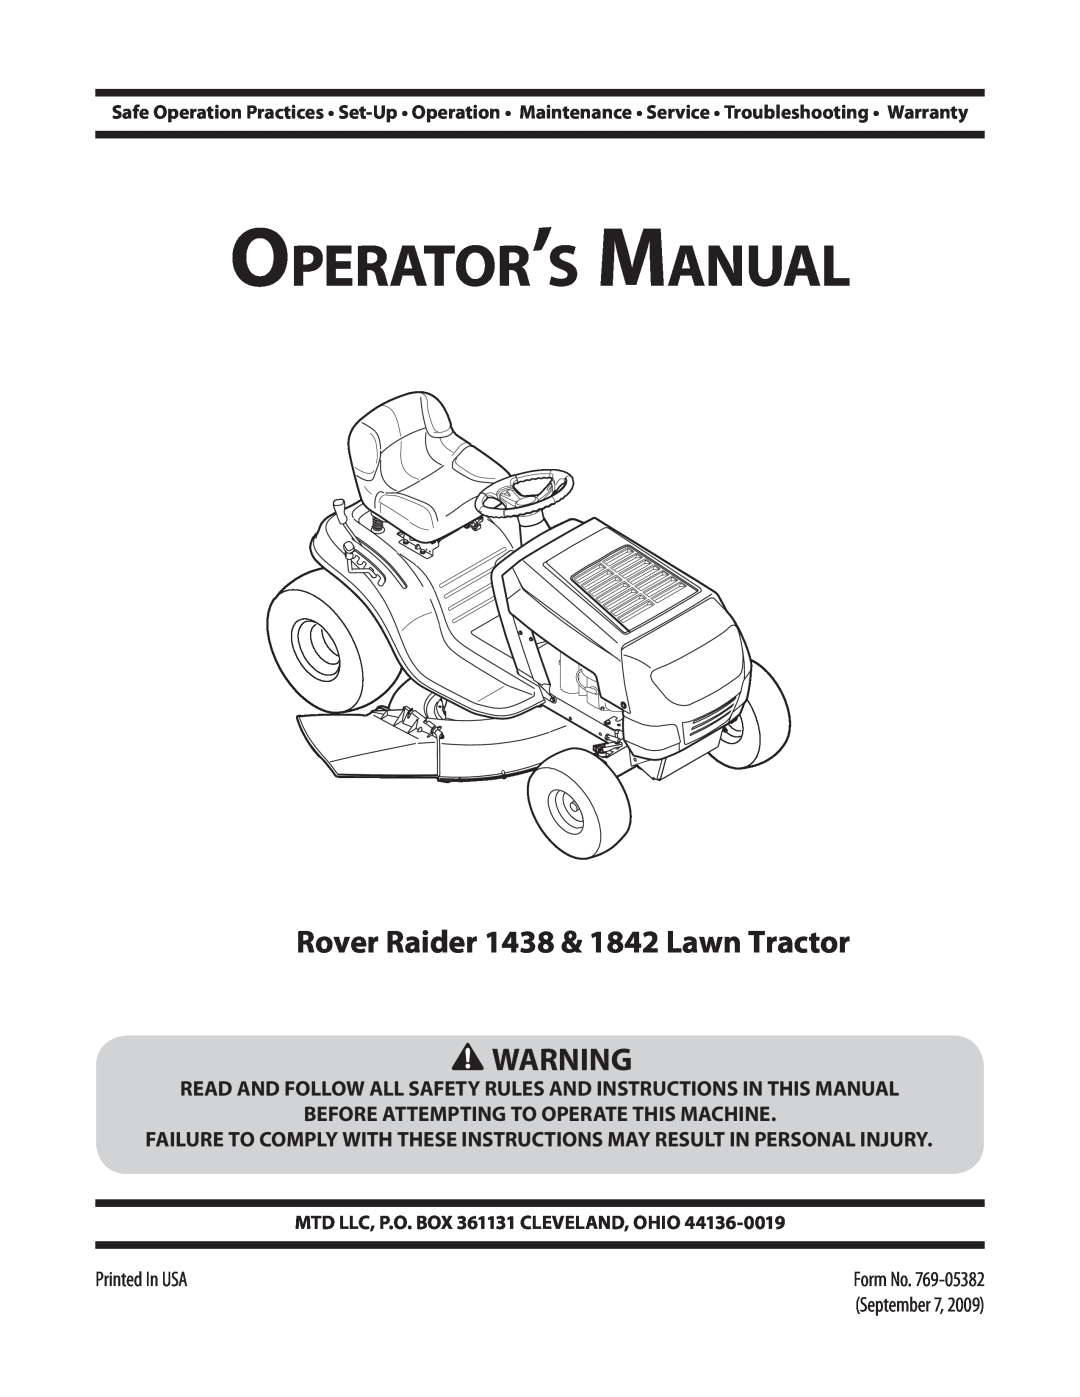 MTD 1842, 1438 warranty Read And Follow All Safety Rules And Instructions In This Manual, Operator’s Manual 